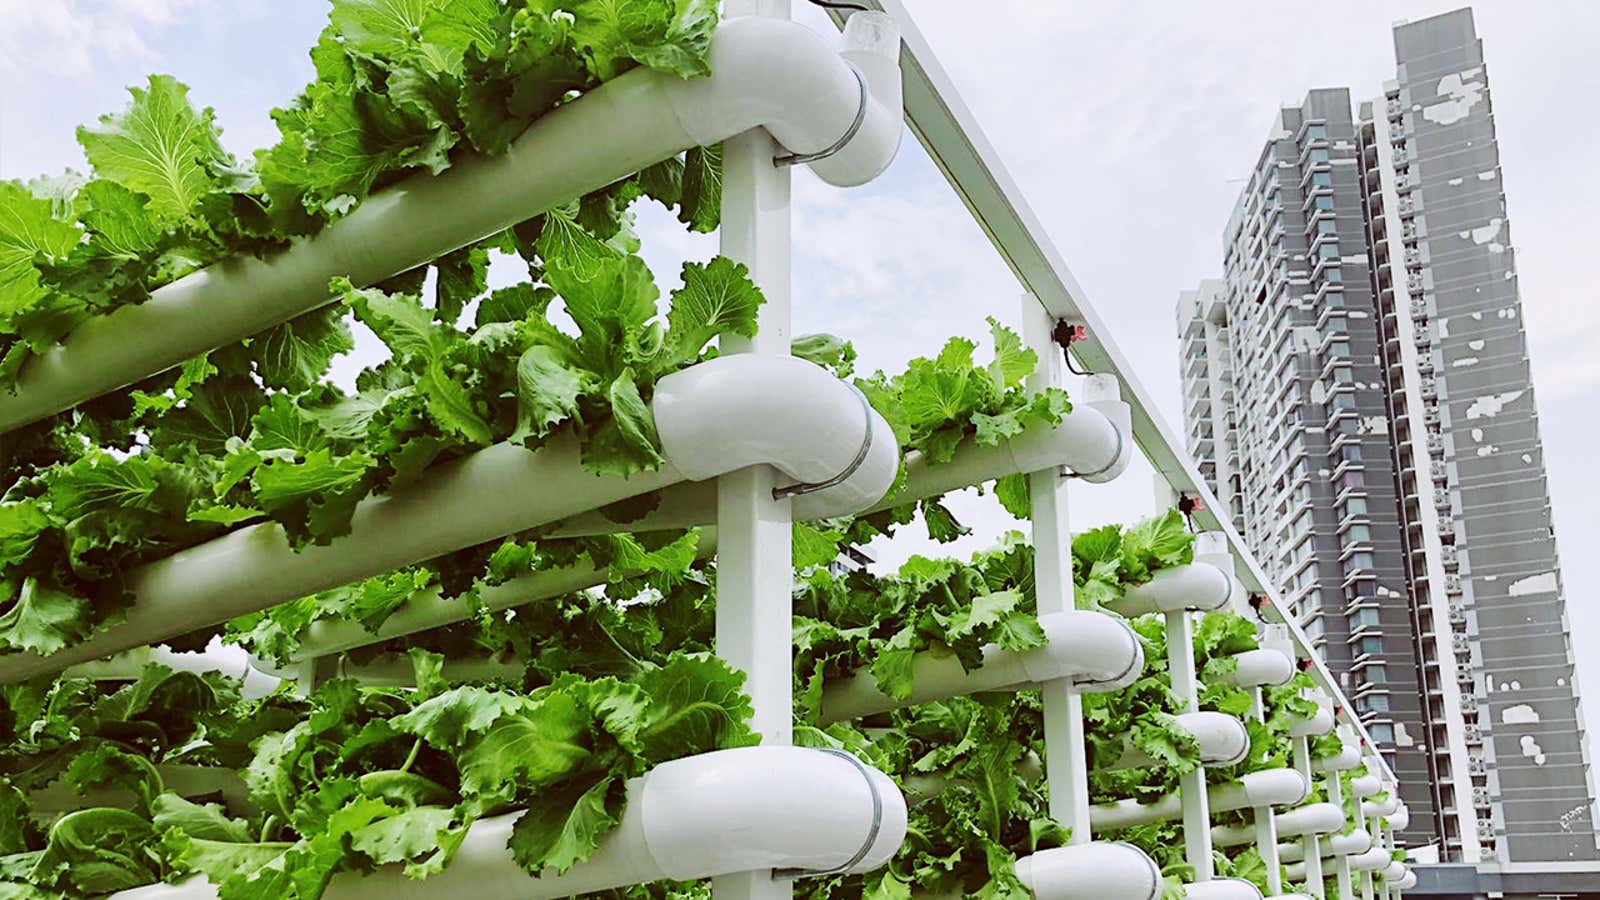 Leafy greens grow in the Citiponics hydroponic system.